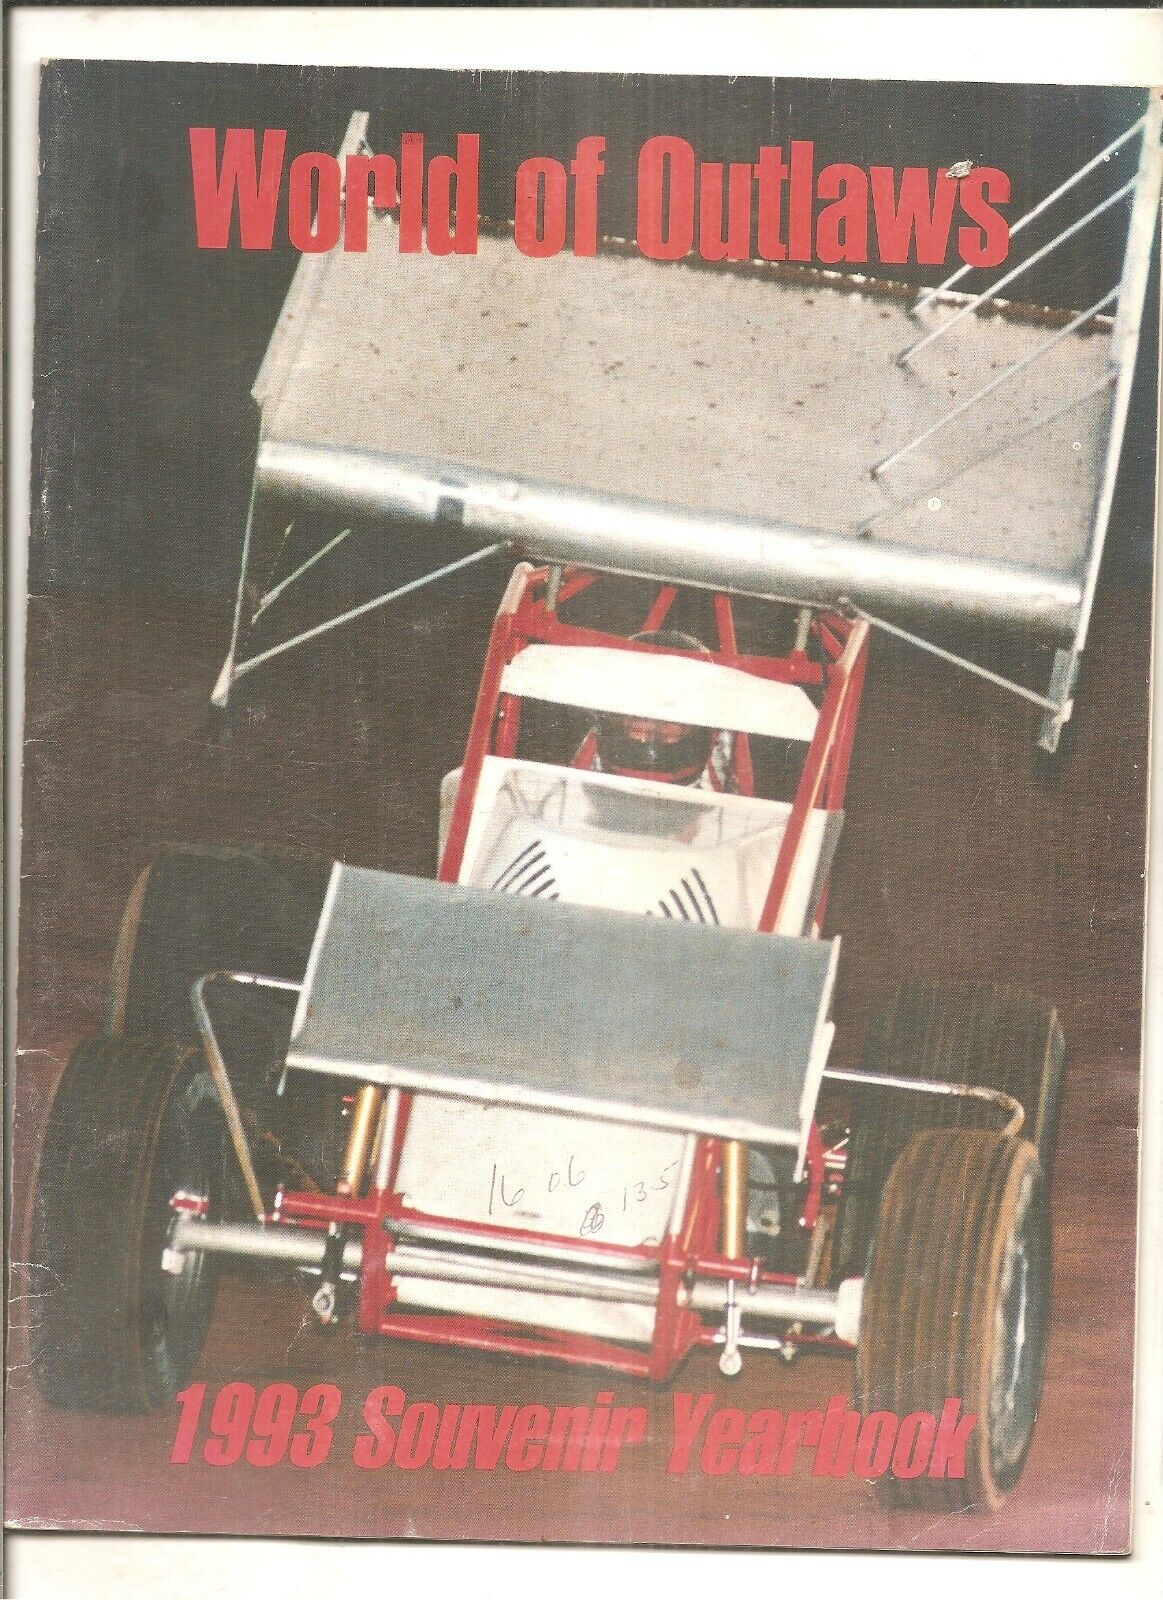 1993 World Of Outlaws Racing Souvenir Yearbook